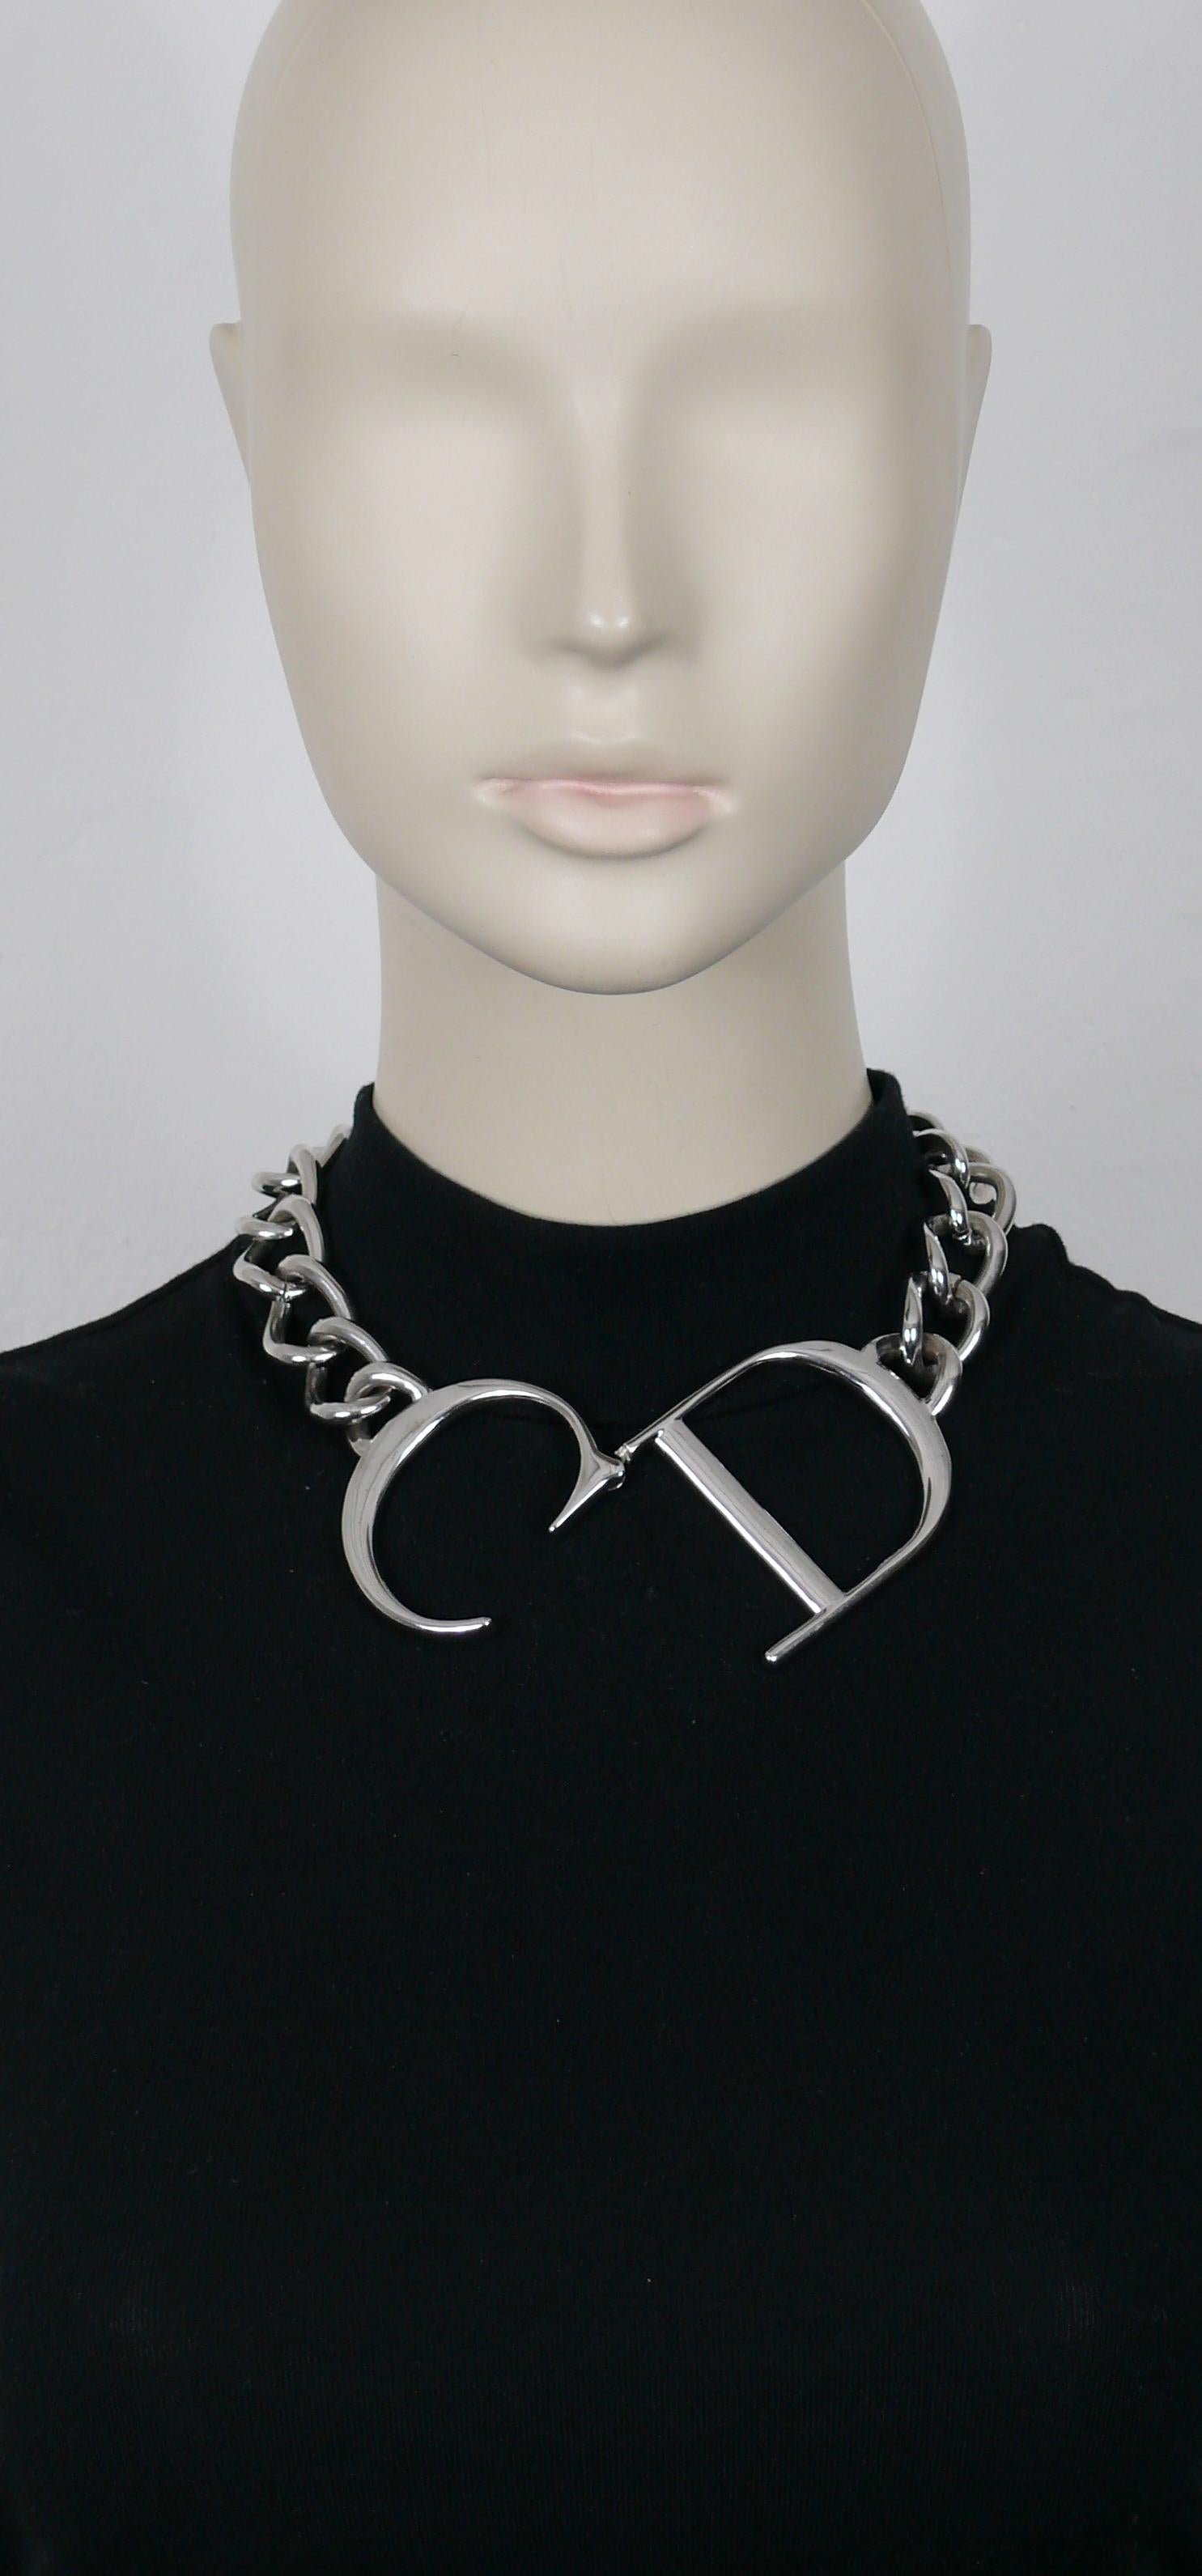 CHRISTIAN DIOR by JOHN GALLIANO chunky silver tone curb chain necklace featuring a giant articulated CD monogram centrepiece.

From the Fall/Winter Ready-to-Wear Collection.
Similar models seen on CHRISTIAN DIOR advertising campaign (gold tone